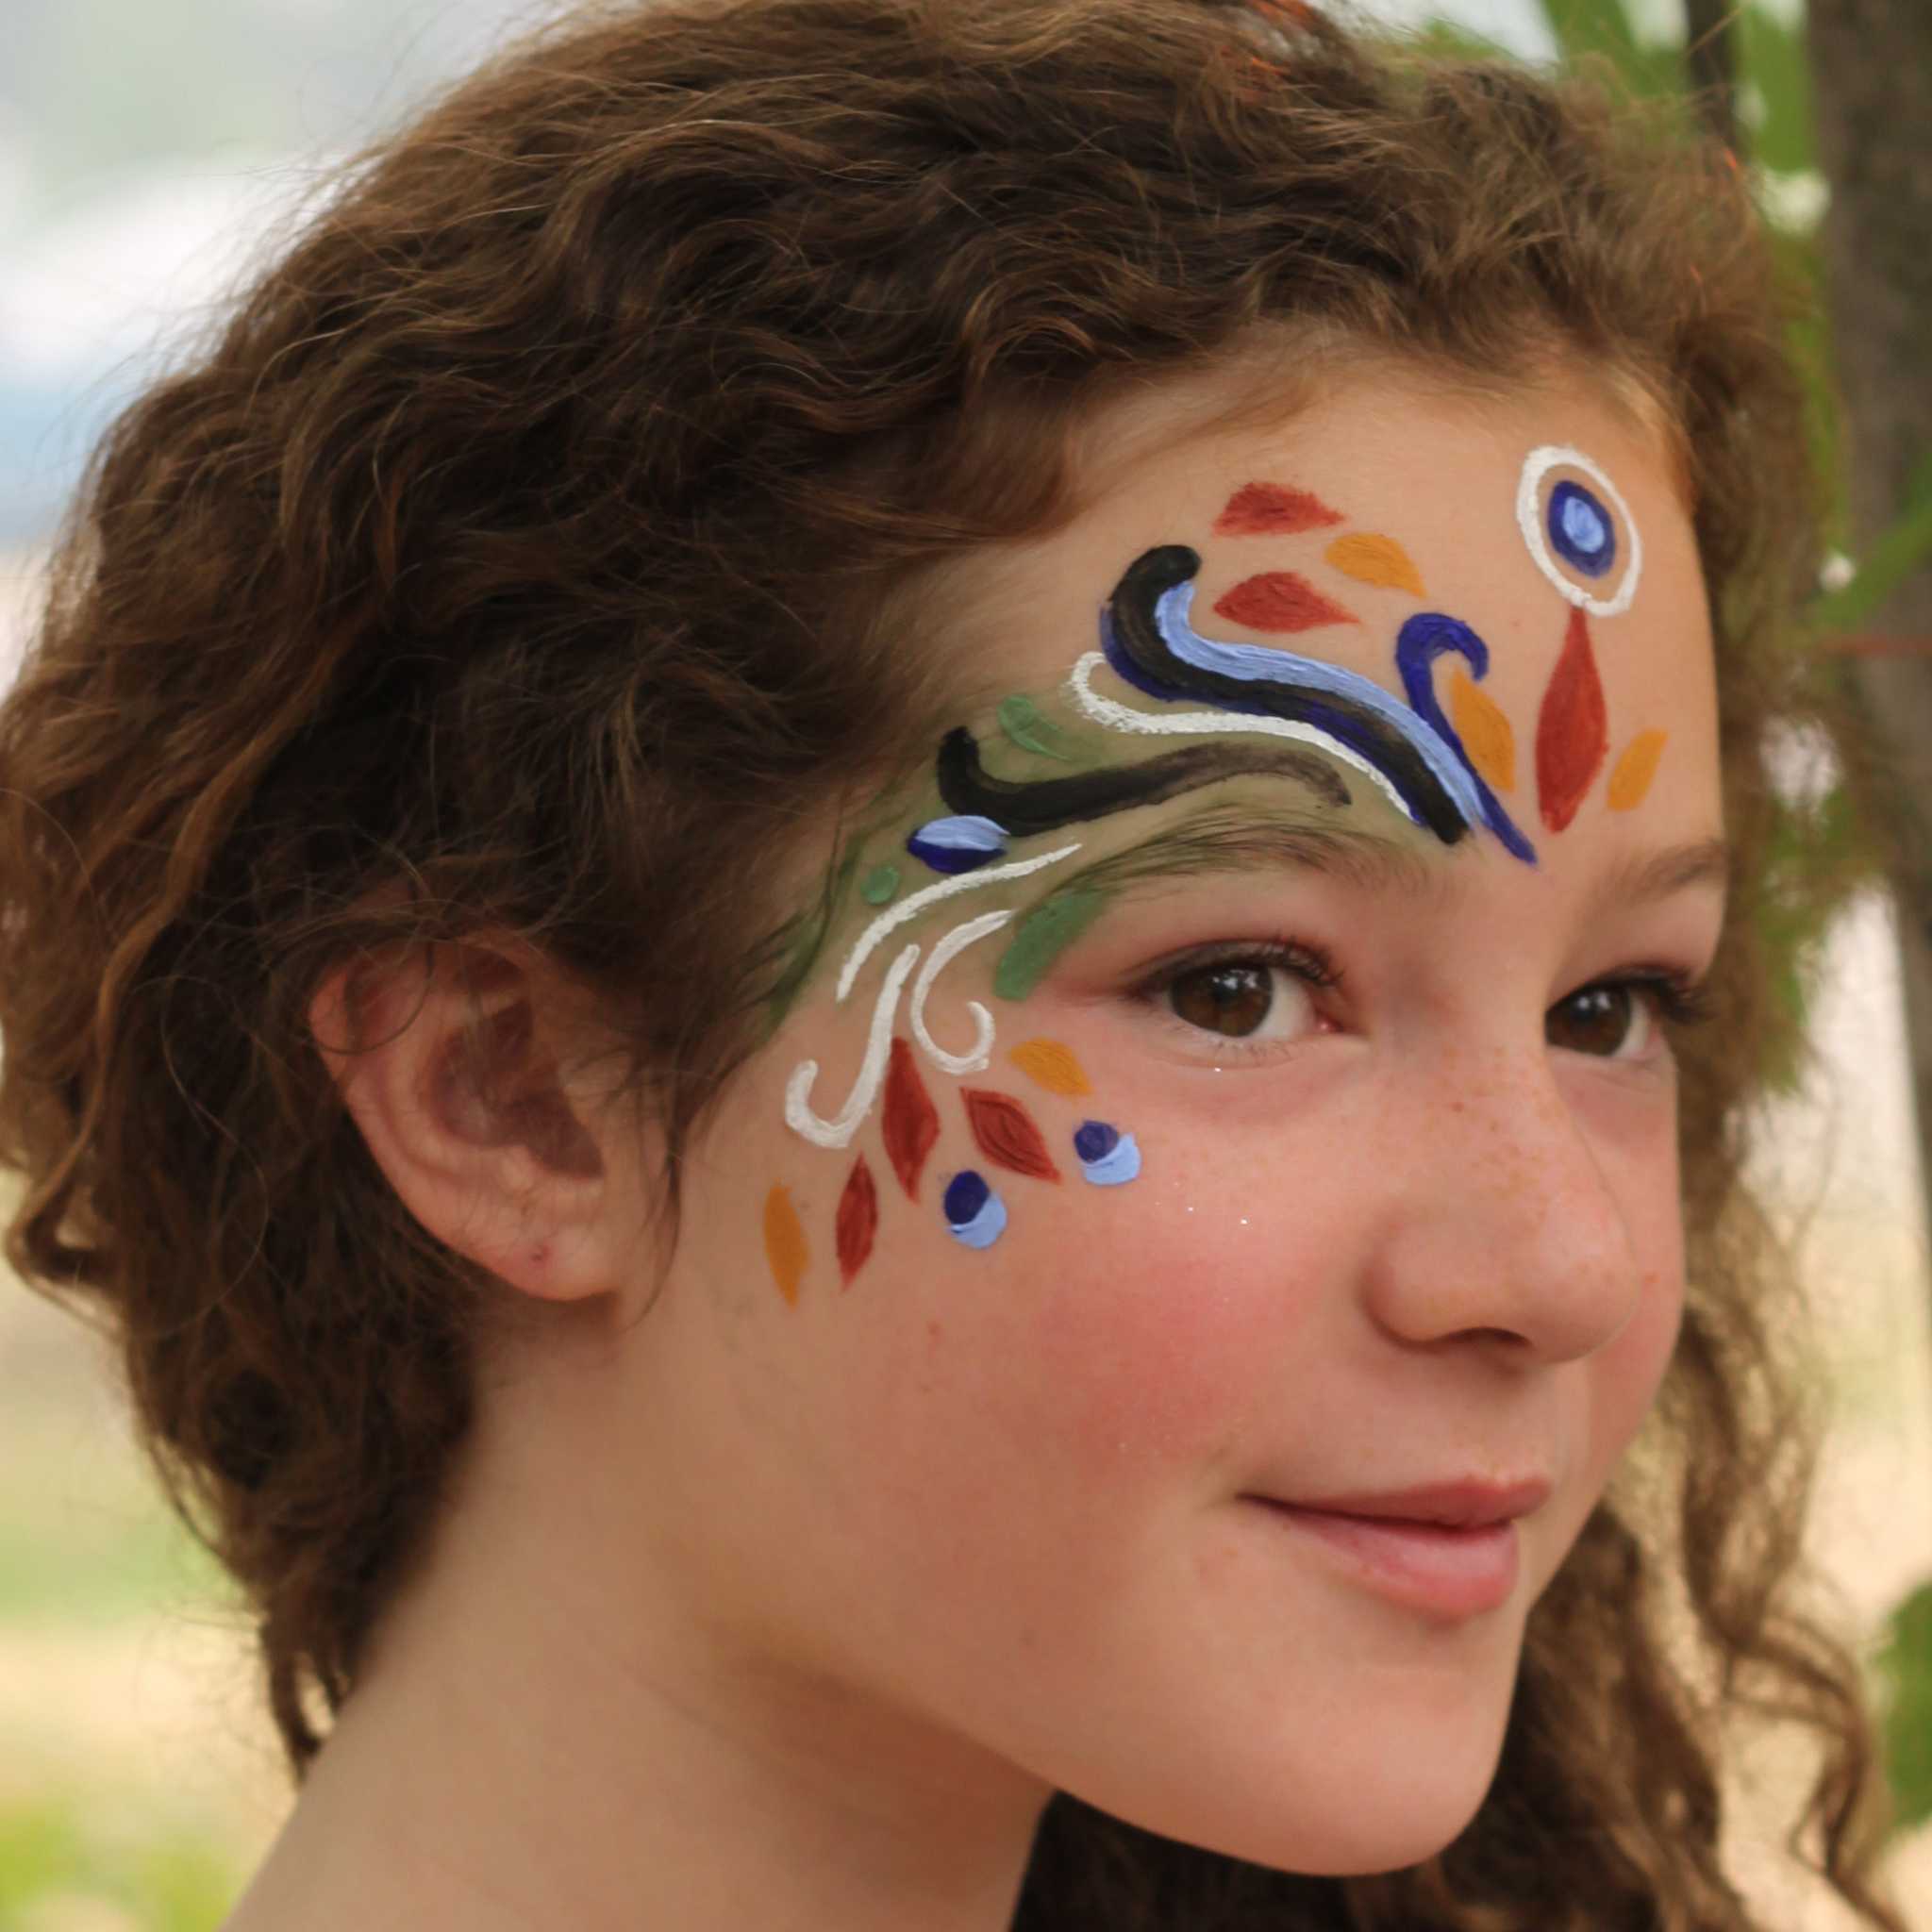 Natural Earth Natural Face Paint - 6 Pack -Showing Girls Face Painted